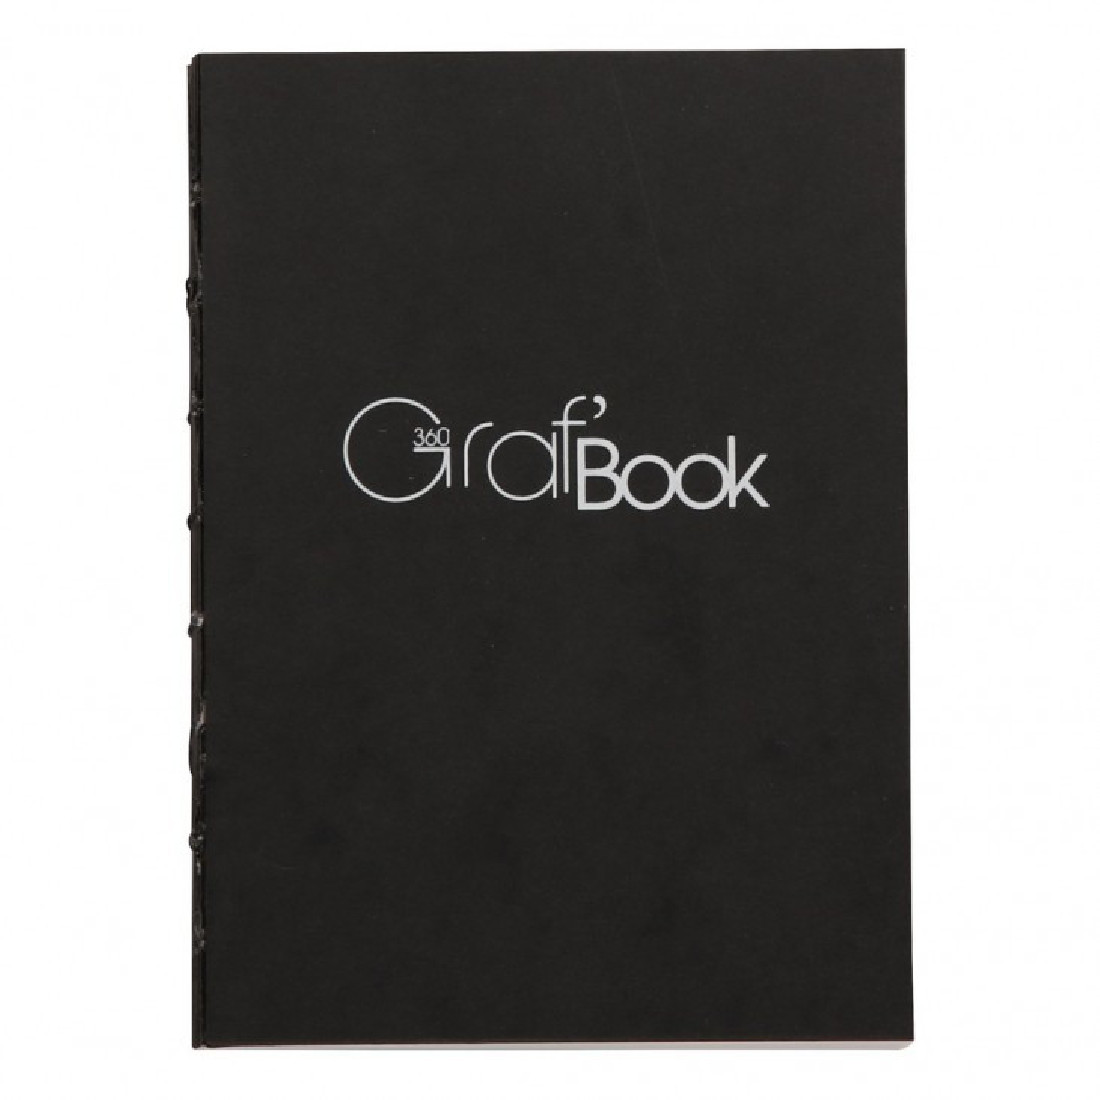 Clairfontaine Grafbook A4, drawing white paper 100g, 200 pages, A4 Black